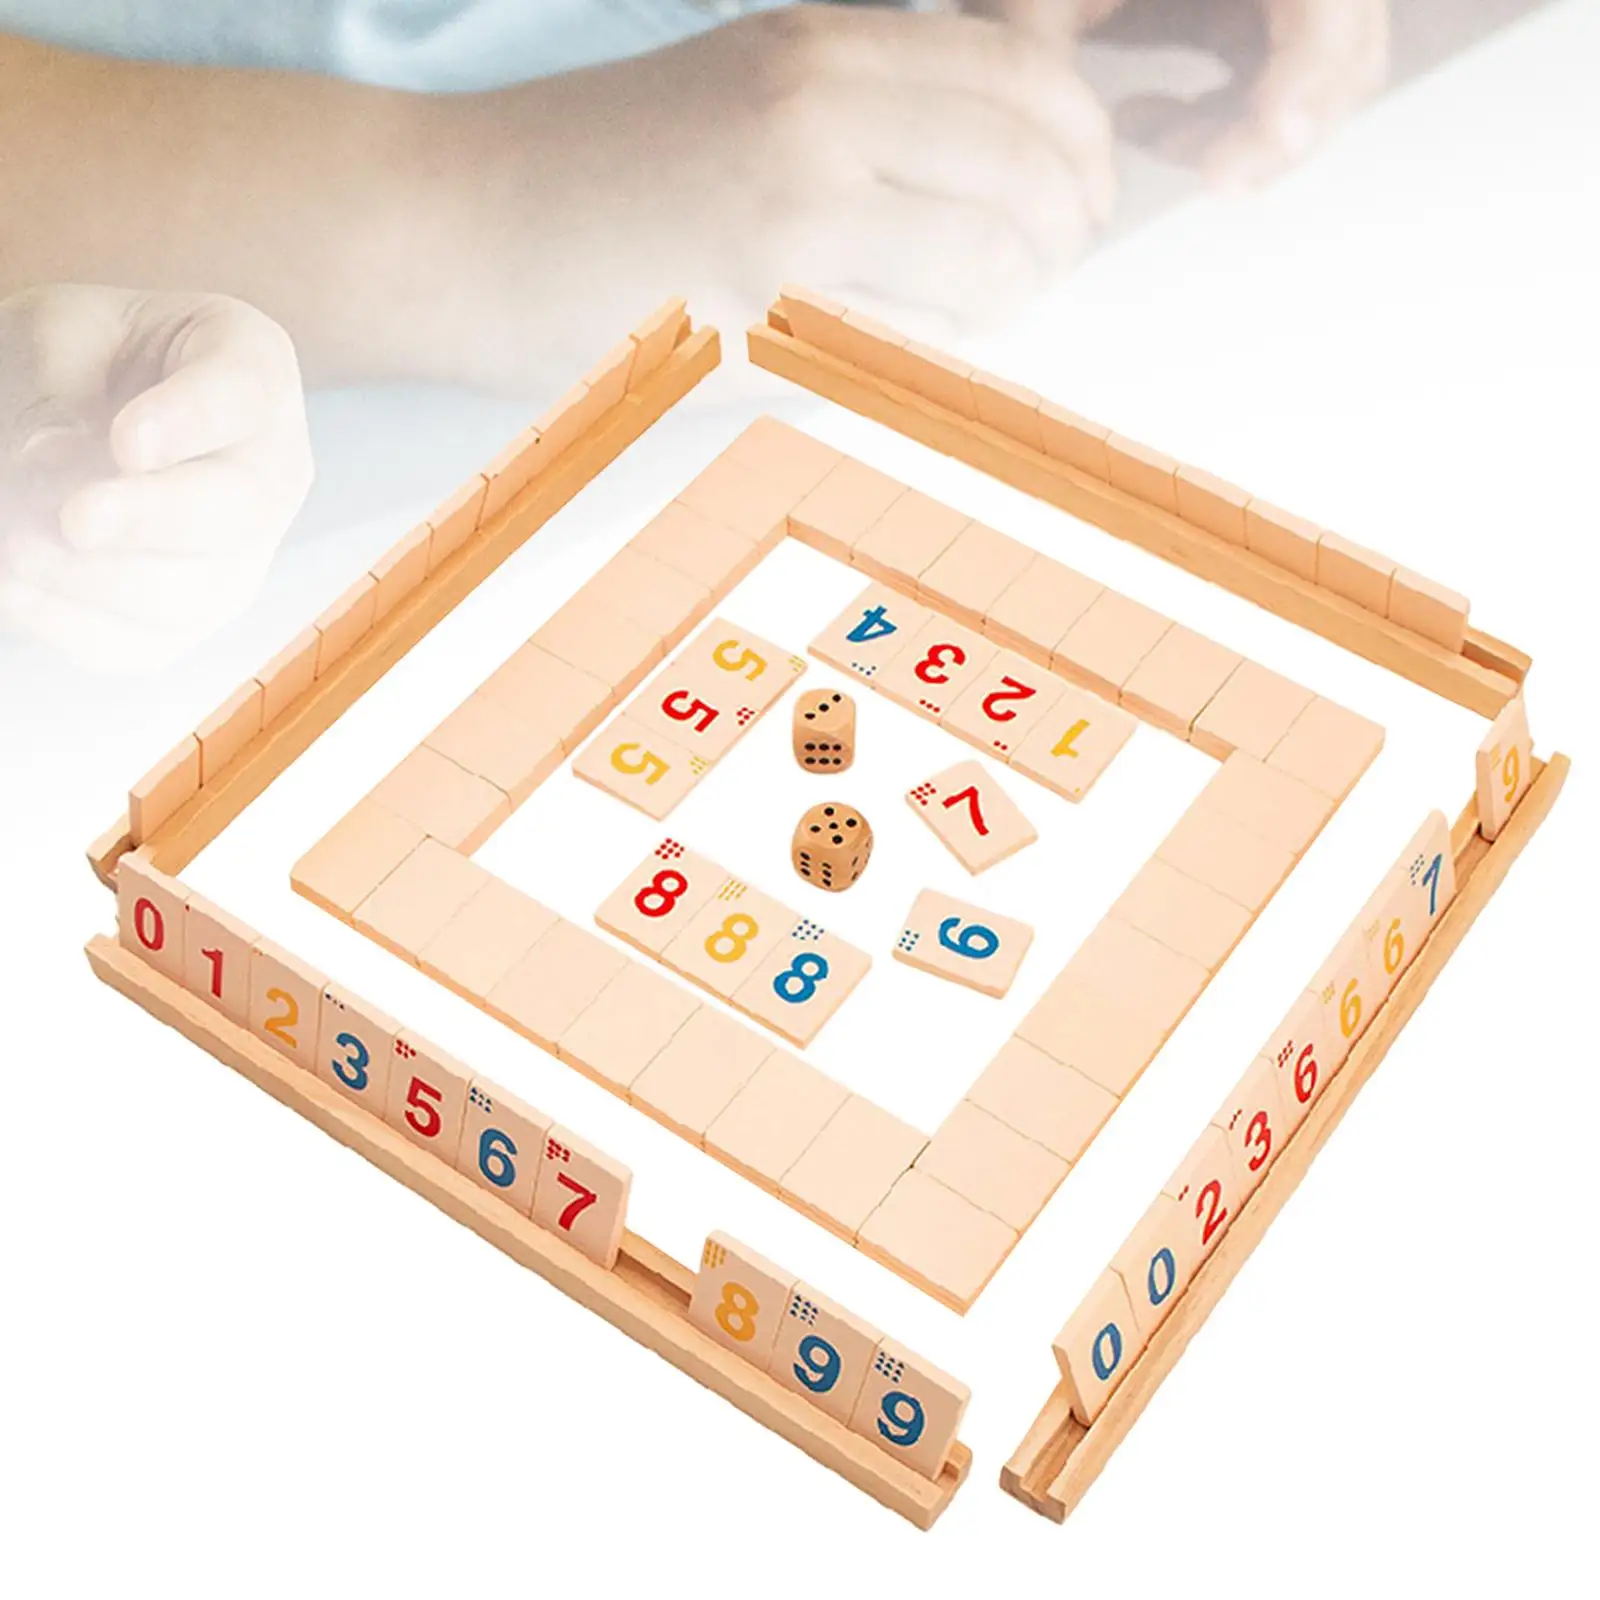 Wooden 2-4 People Mahjong Digital Game Educational Toys Family Party Game Fast Moving Tile for Teens Adults Kids